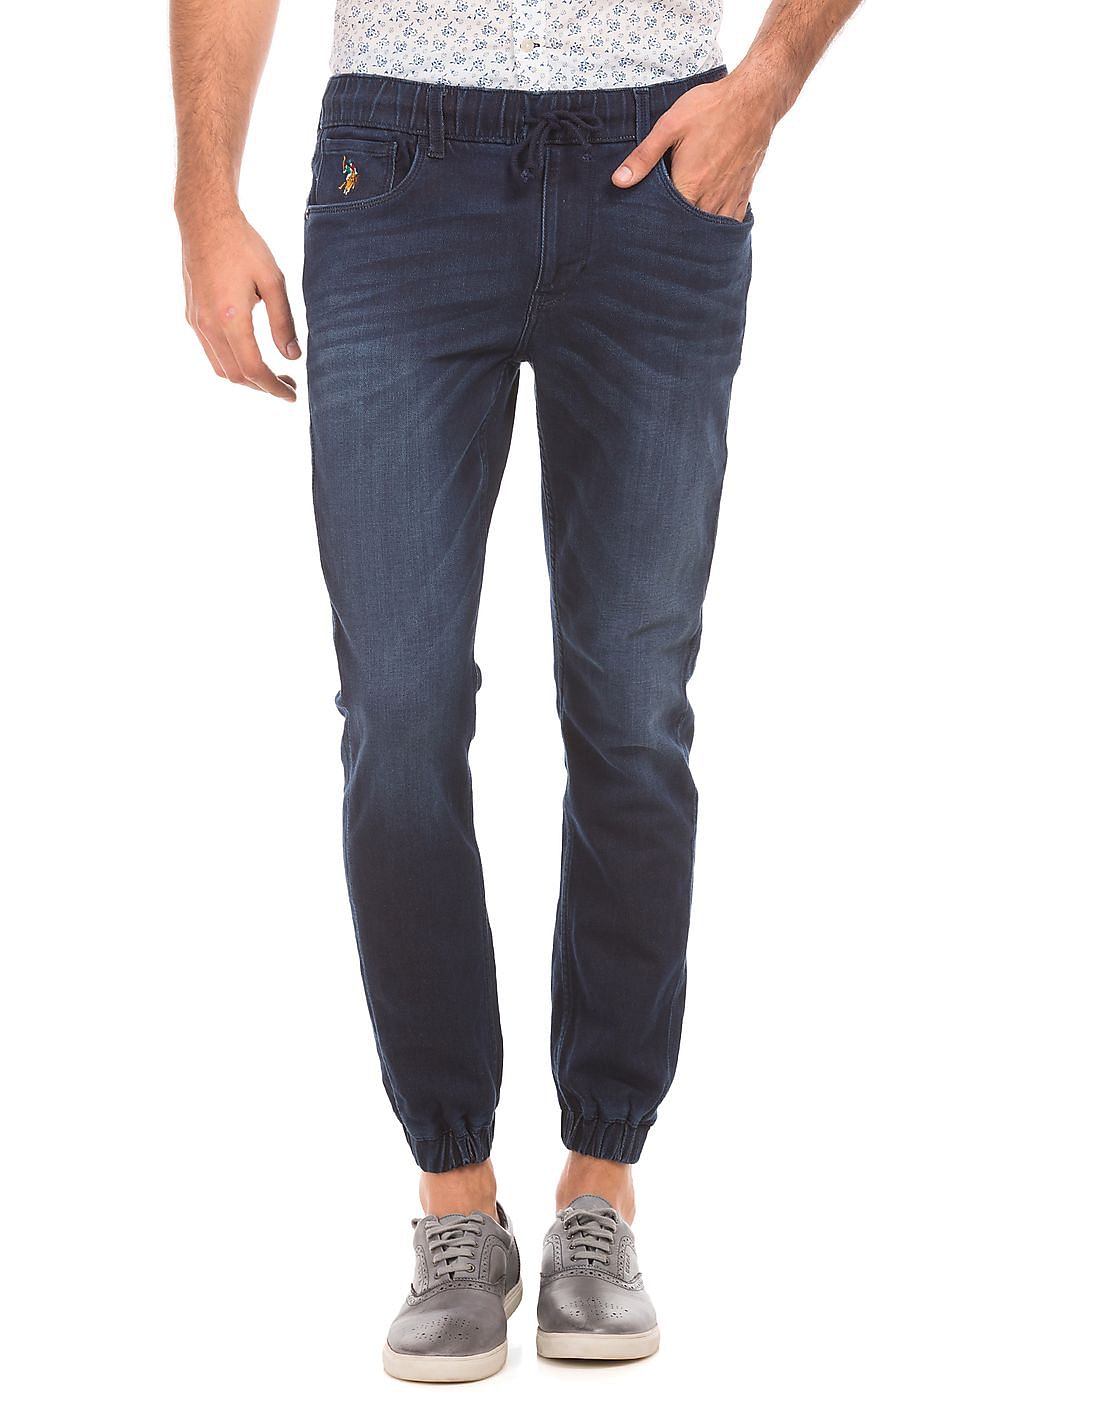 Buy U.S. Polo Assn. Denim Co. Men Washed Jogger Jeans - NNNOW.com